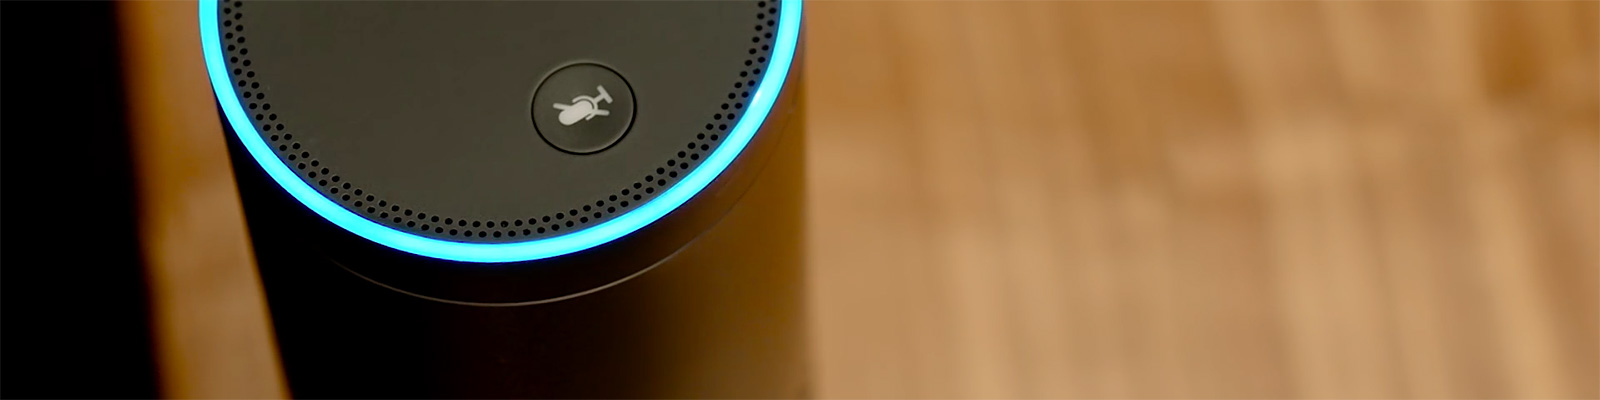 Amazon Echo: Grant Hill and Steve Smith "March Madness" Commercial（amazon）